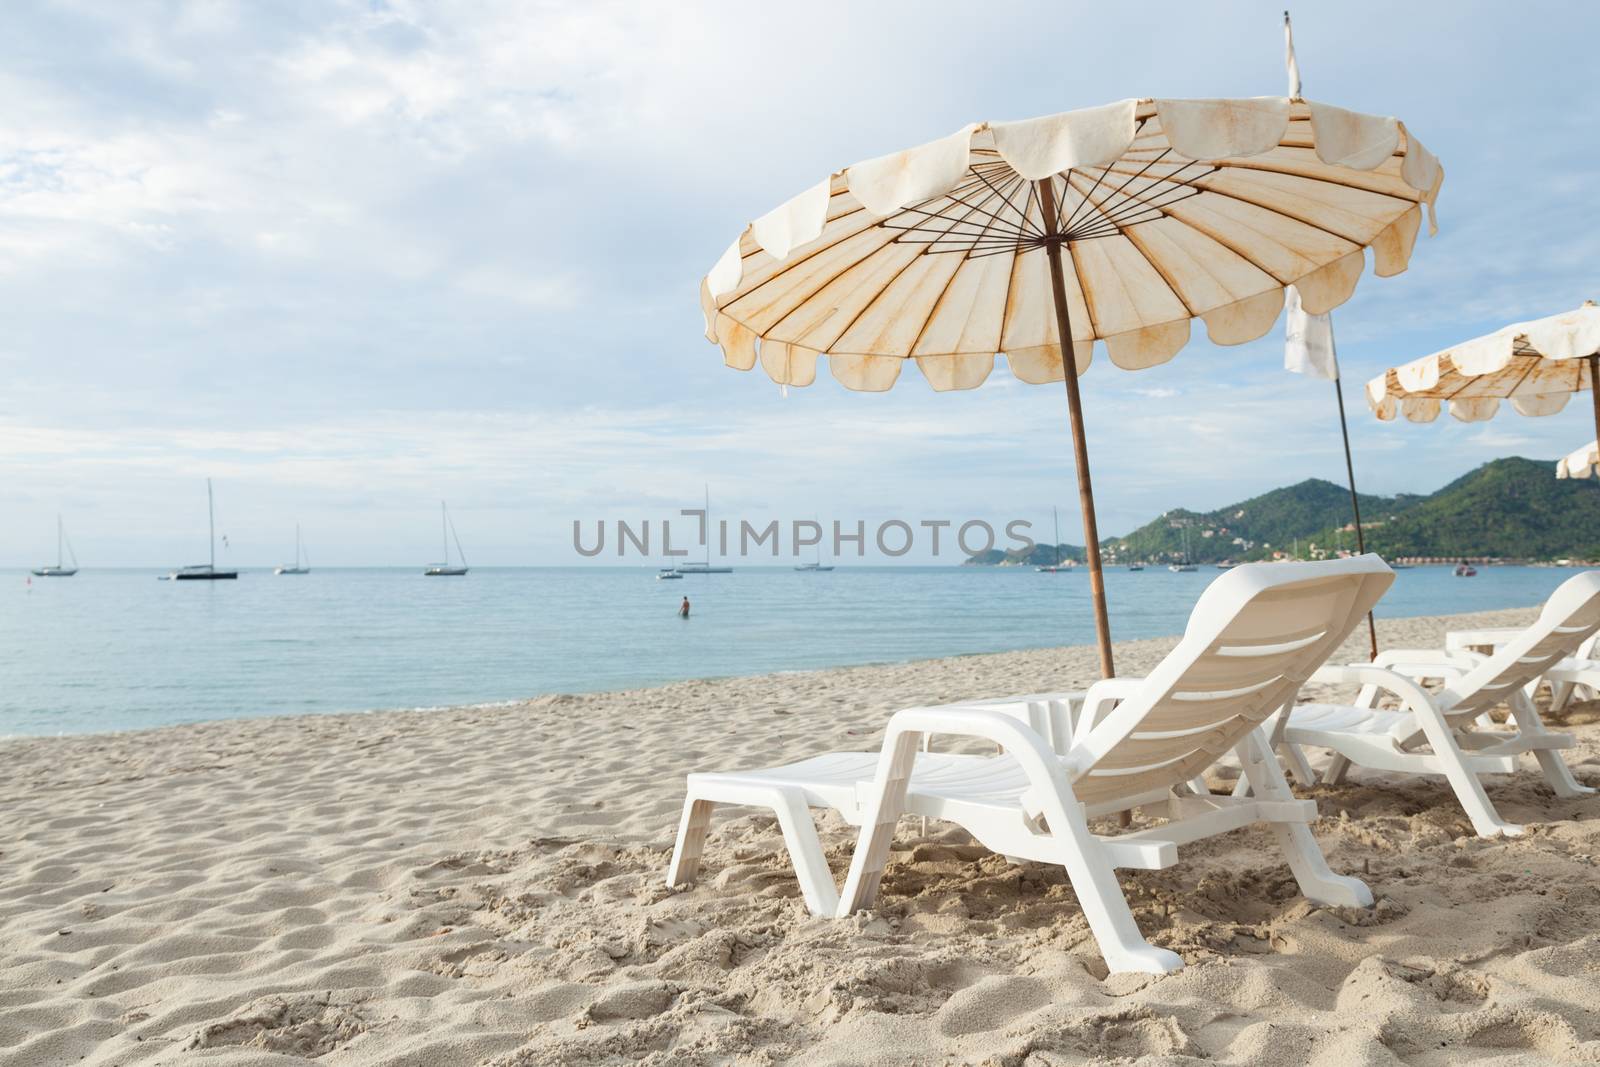 Beds and umbrellas on the beach. The seaside beach tourist attractions.